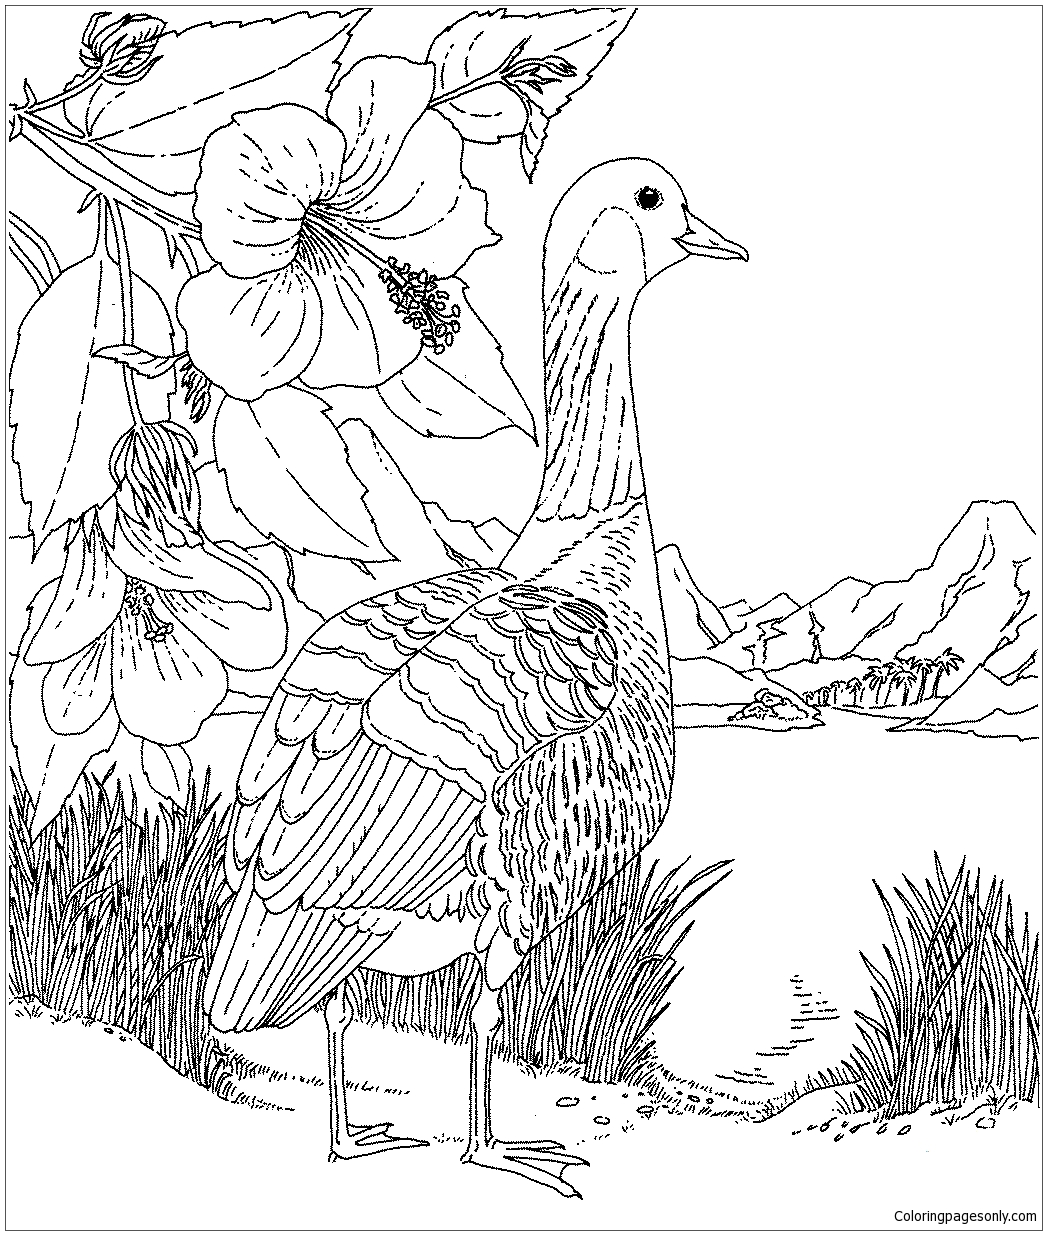 Nene e Hibiscus Hawaii State Bird and Flower Coloring Page